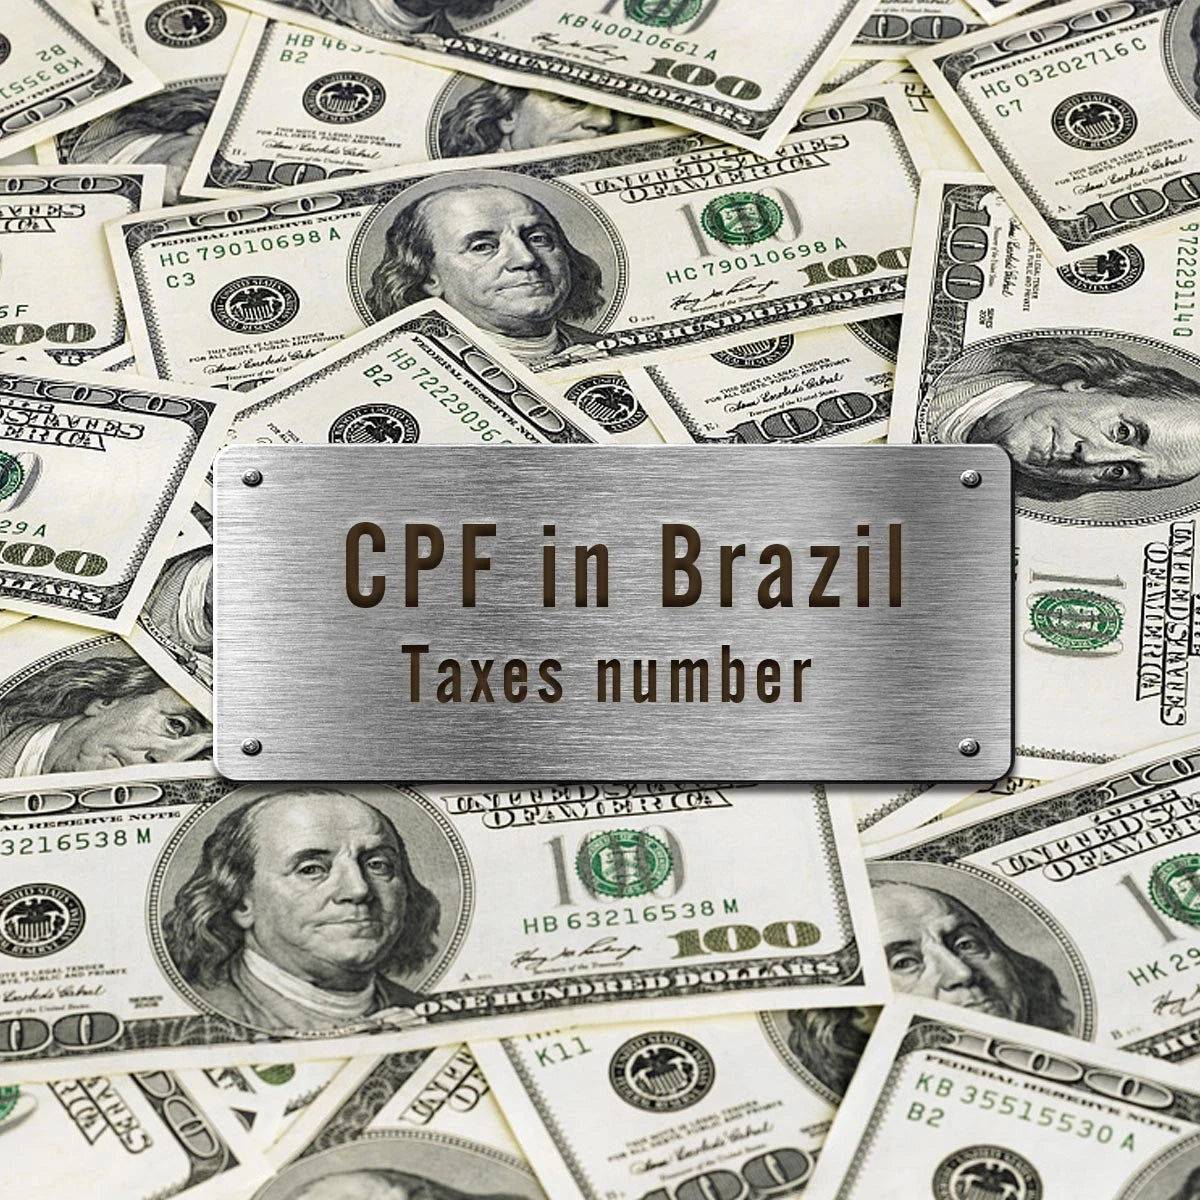 All orders ( Brazil) need the tax ID number (CPF)